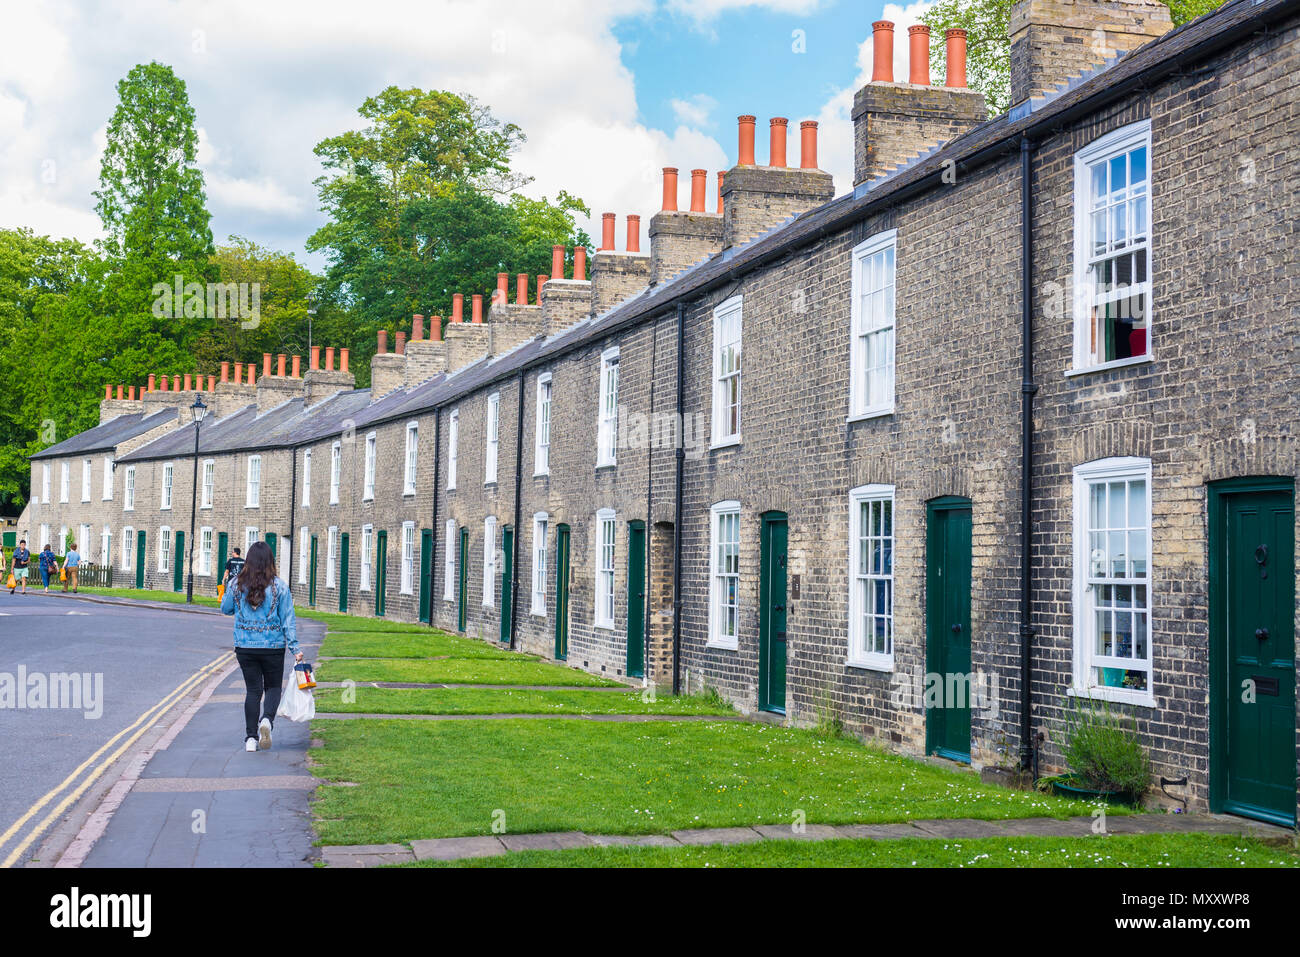 Cambridge, England, UK - June 2018: Row of restored Victorian brick houses with green colored doors on a local road in Cambridge with people walking a Stock Photo